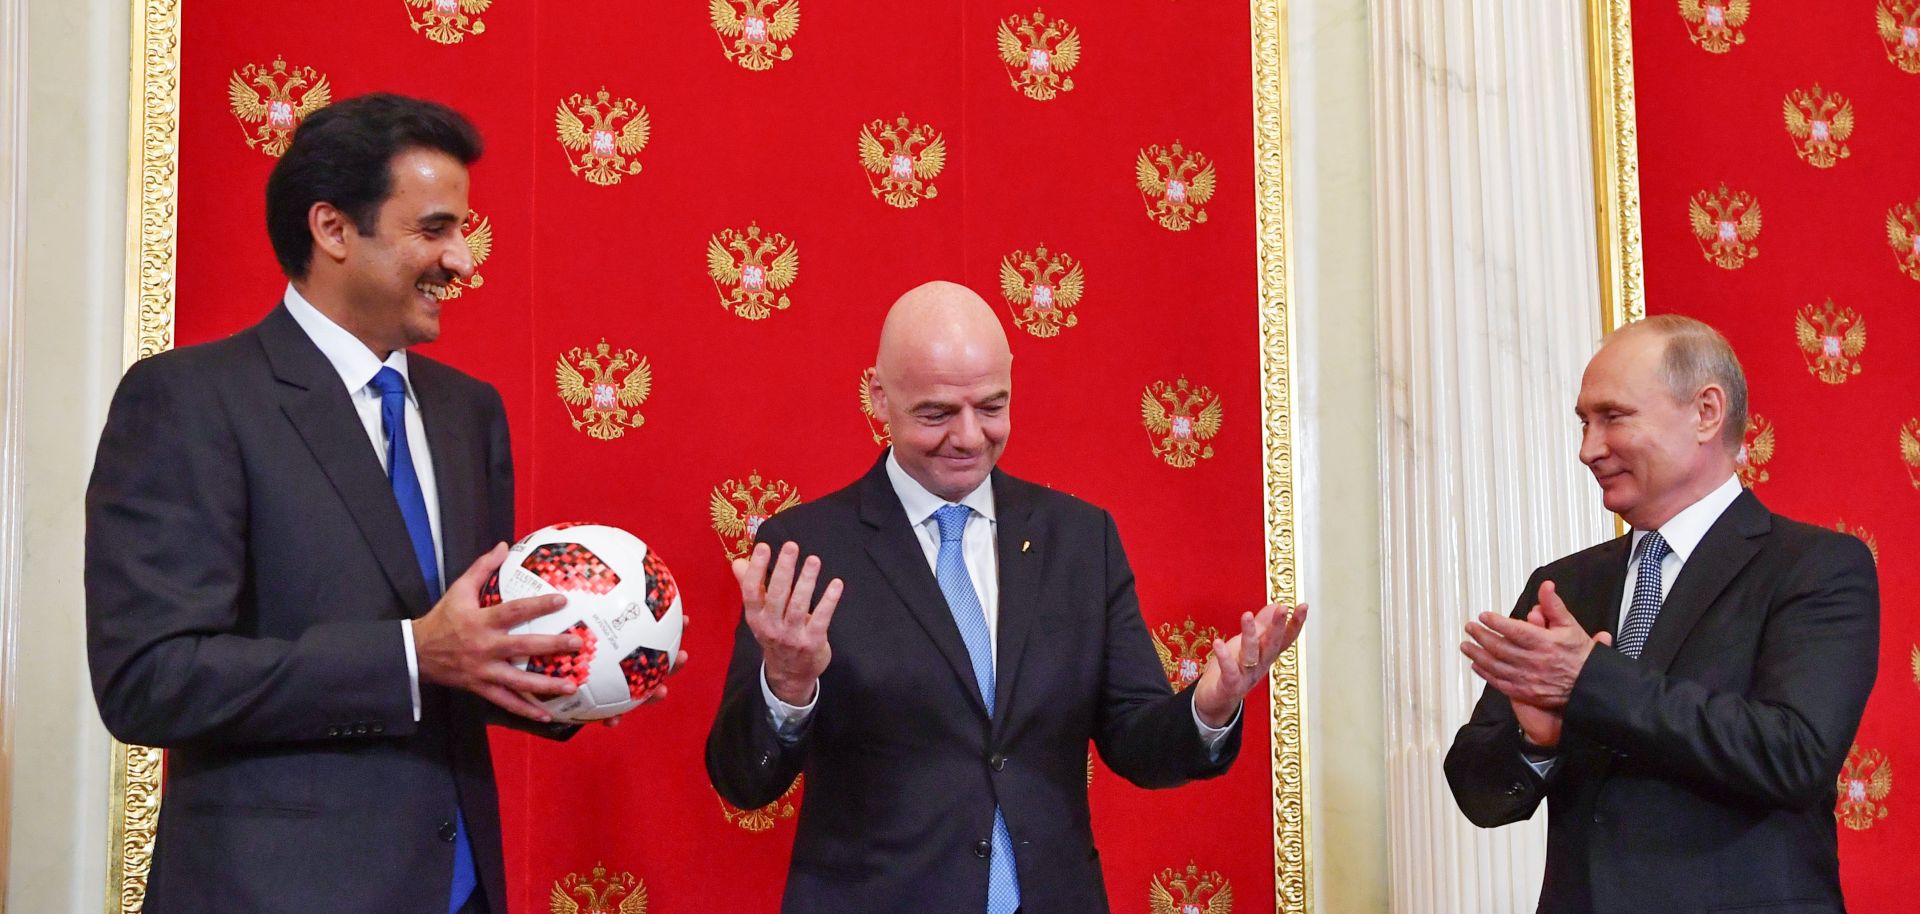 Qatari Emir Sheikh Tamim bin Hamad al-Thani (L) smiles at FIFA President Gianni Infantino (C) and Russian President Vladimir Putin at the end of the 2018 World Cup in Russia. As part of the closing ceremony, Putin passed a soccer ball to al-Thani, whose country will hold the next tournament in 2022, in a symbolic gesture.